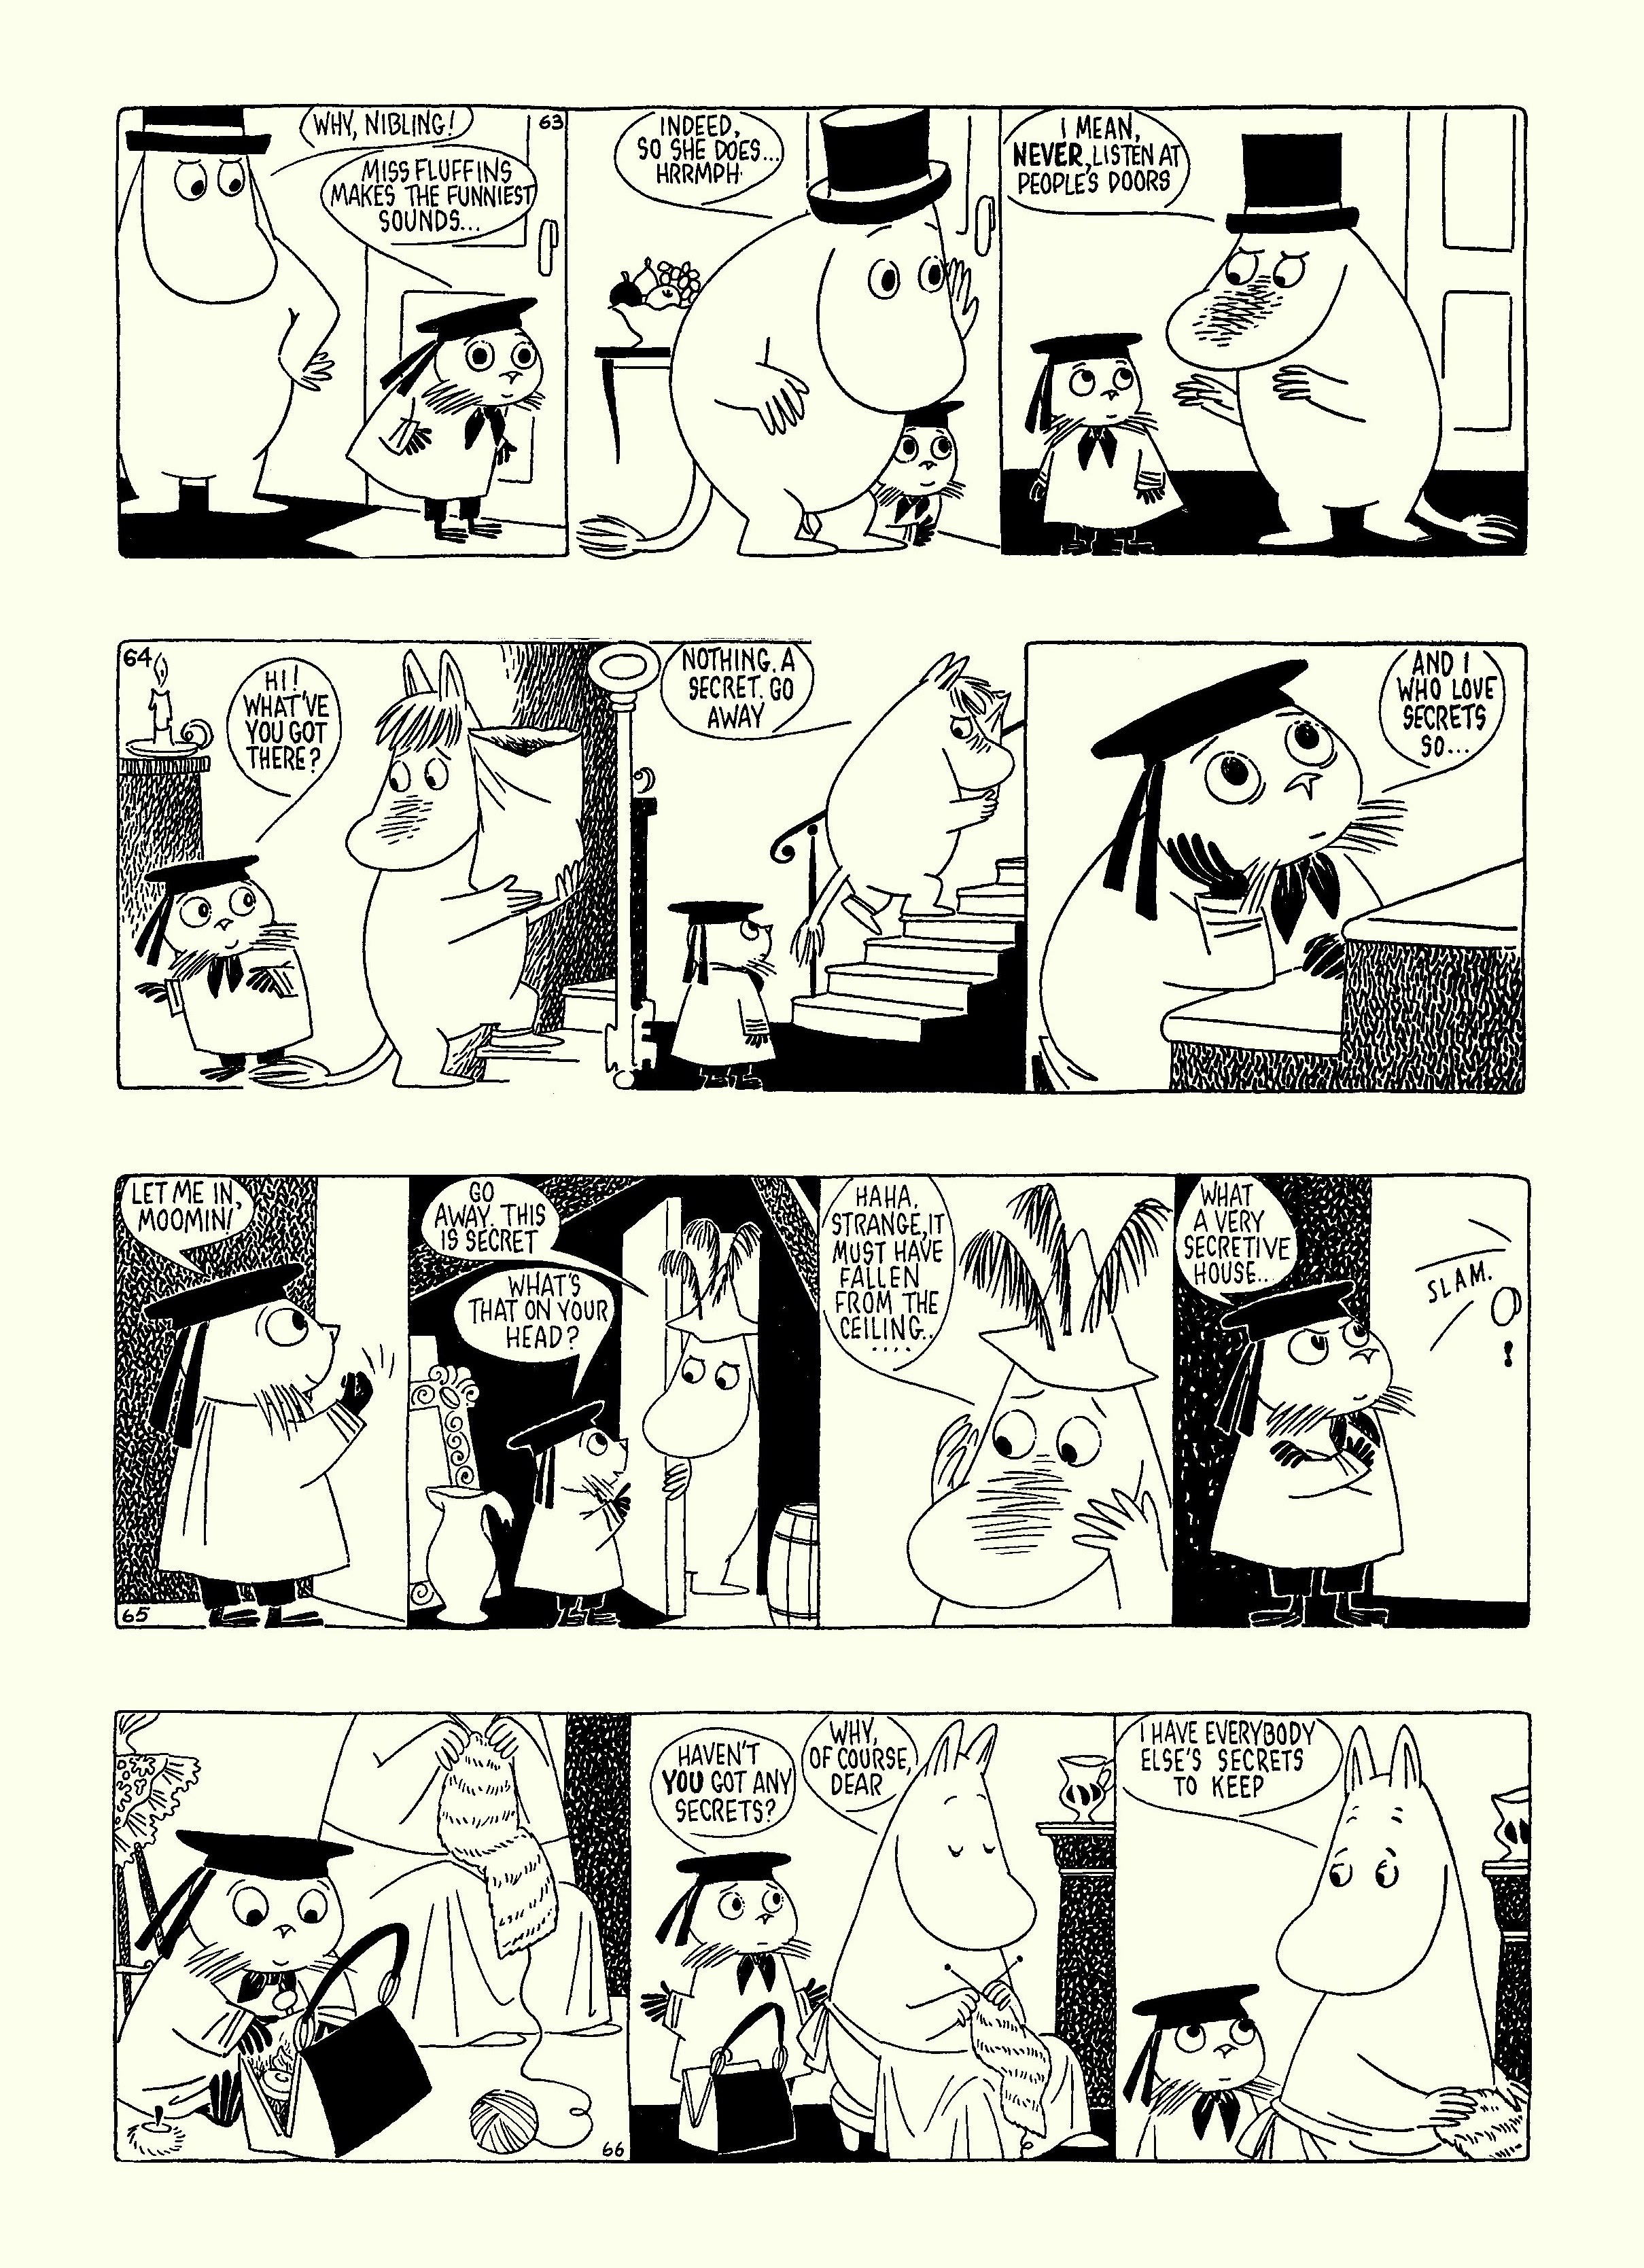 Read online Moomin: The Complete Tove Jansson Comic Strip comic -  Issue # TPB 5 - 22